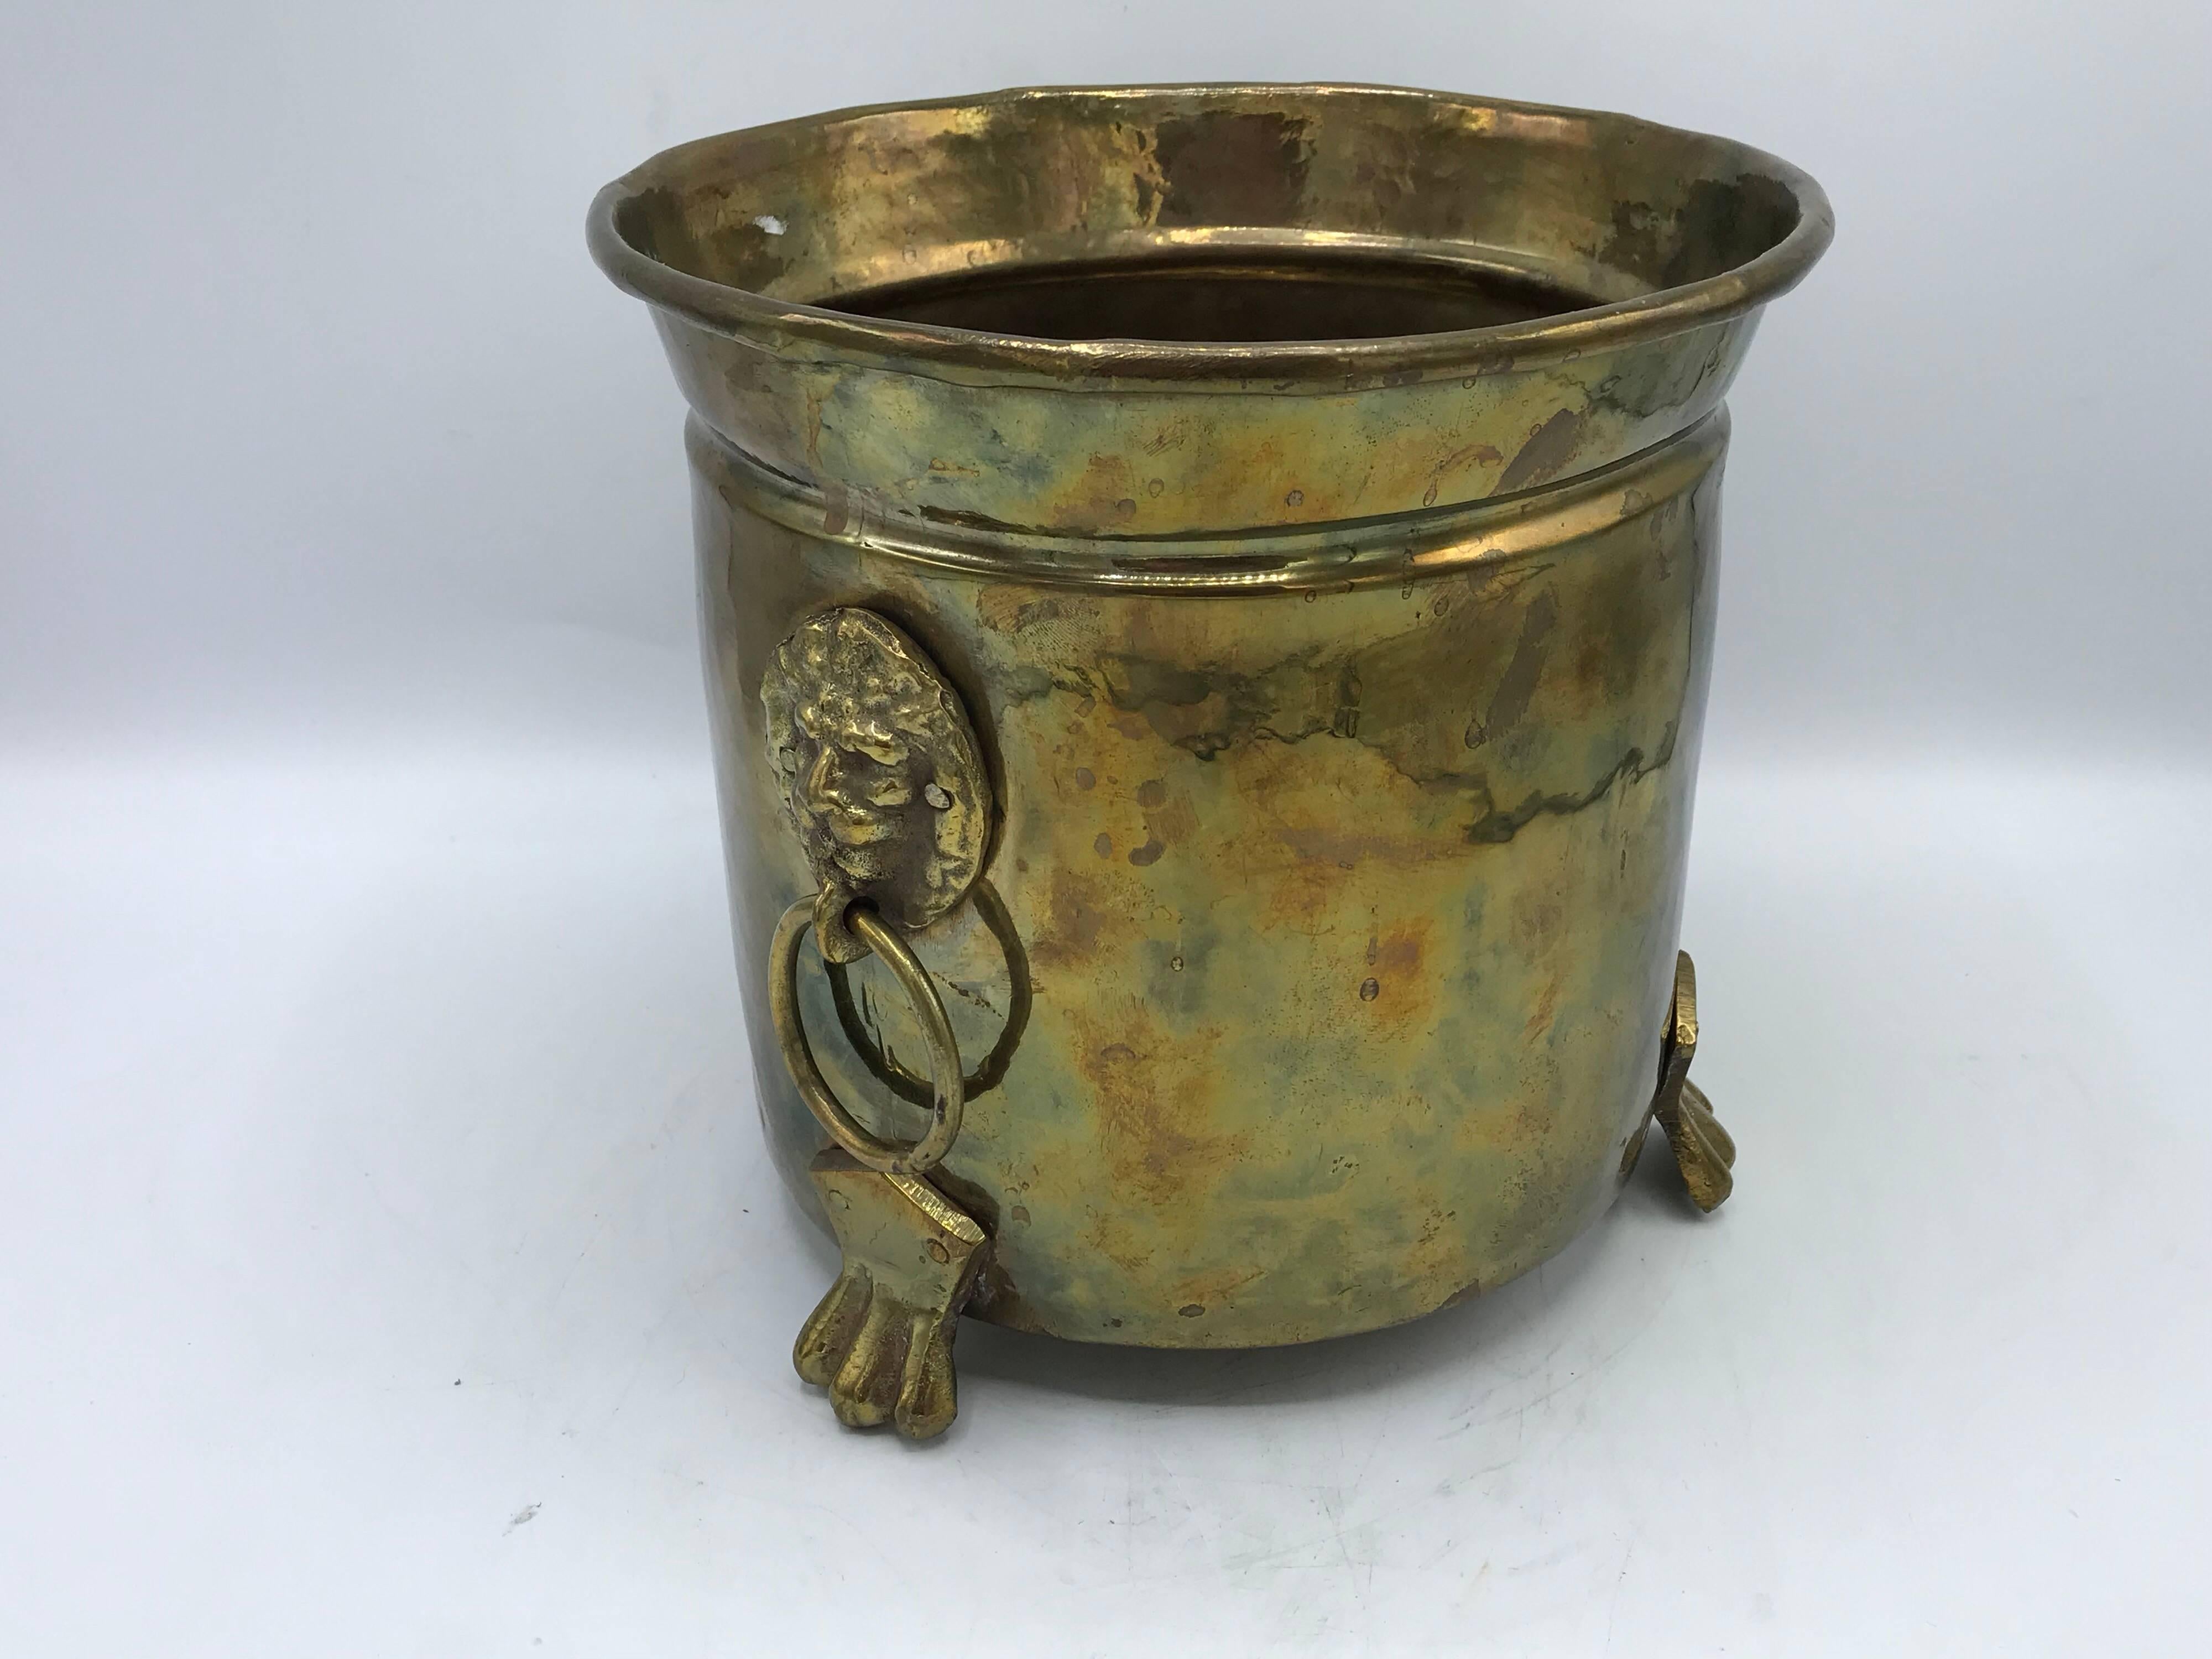 Offered is a beautiful and traditional, 1970s Italian hammered-brass cachepot planter with a lion head pull and foot motif. Heavy.